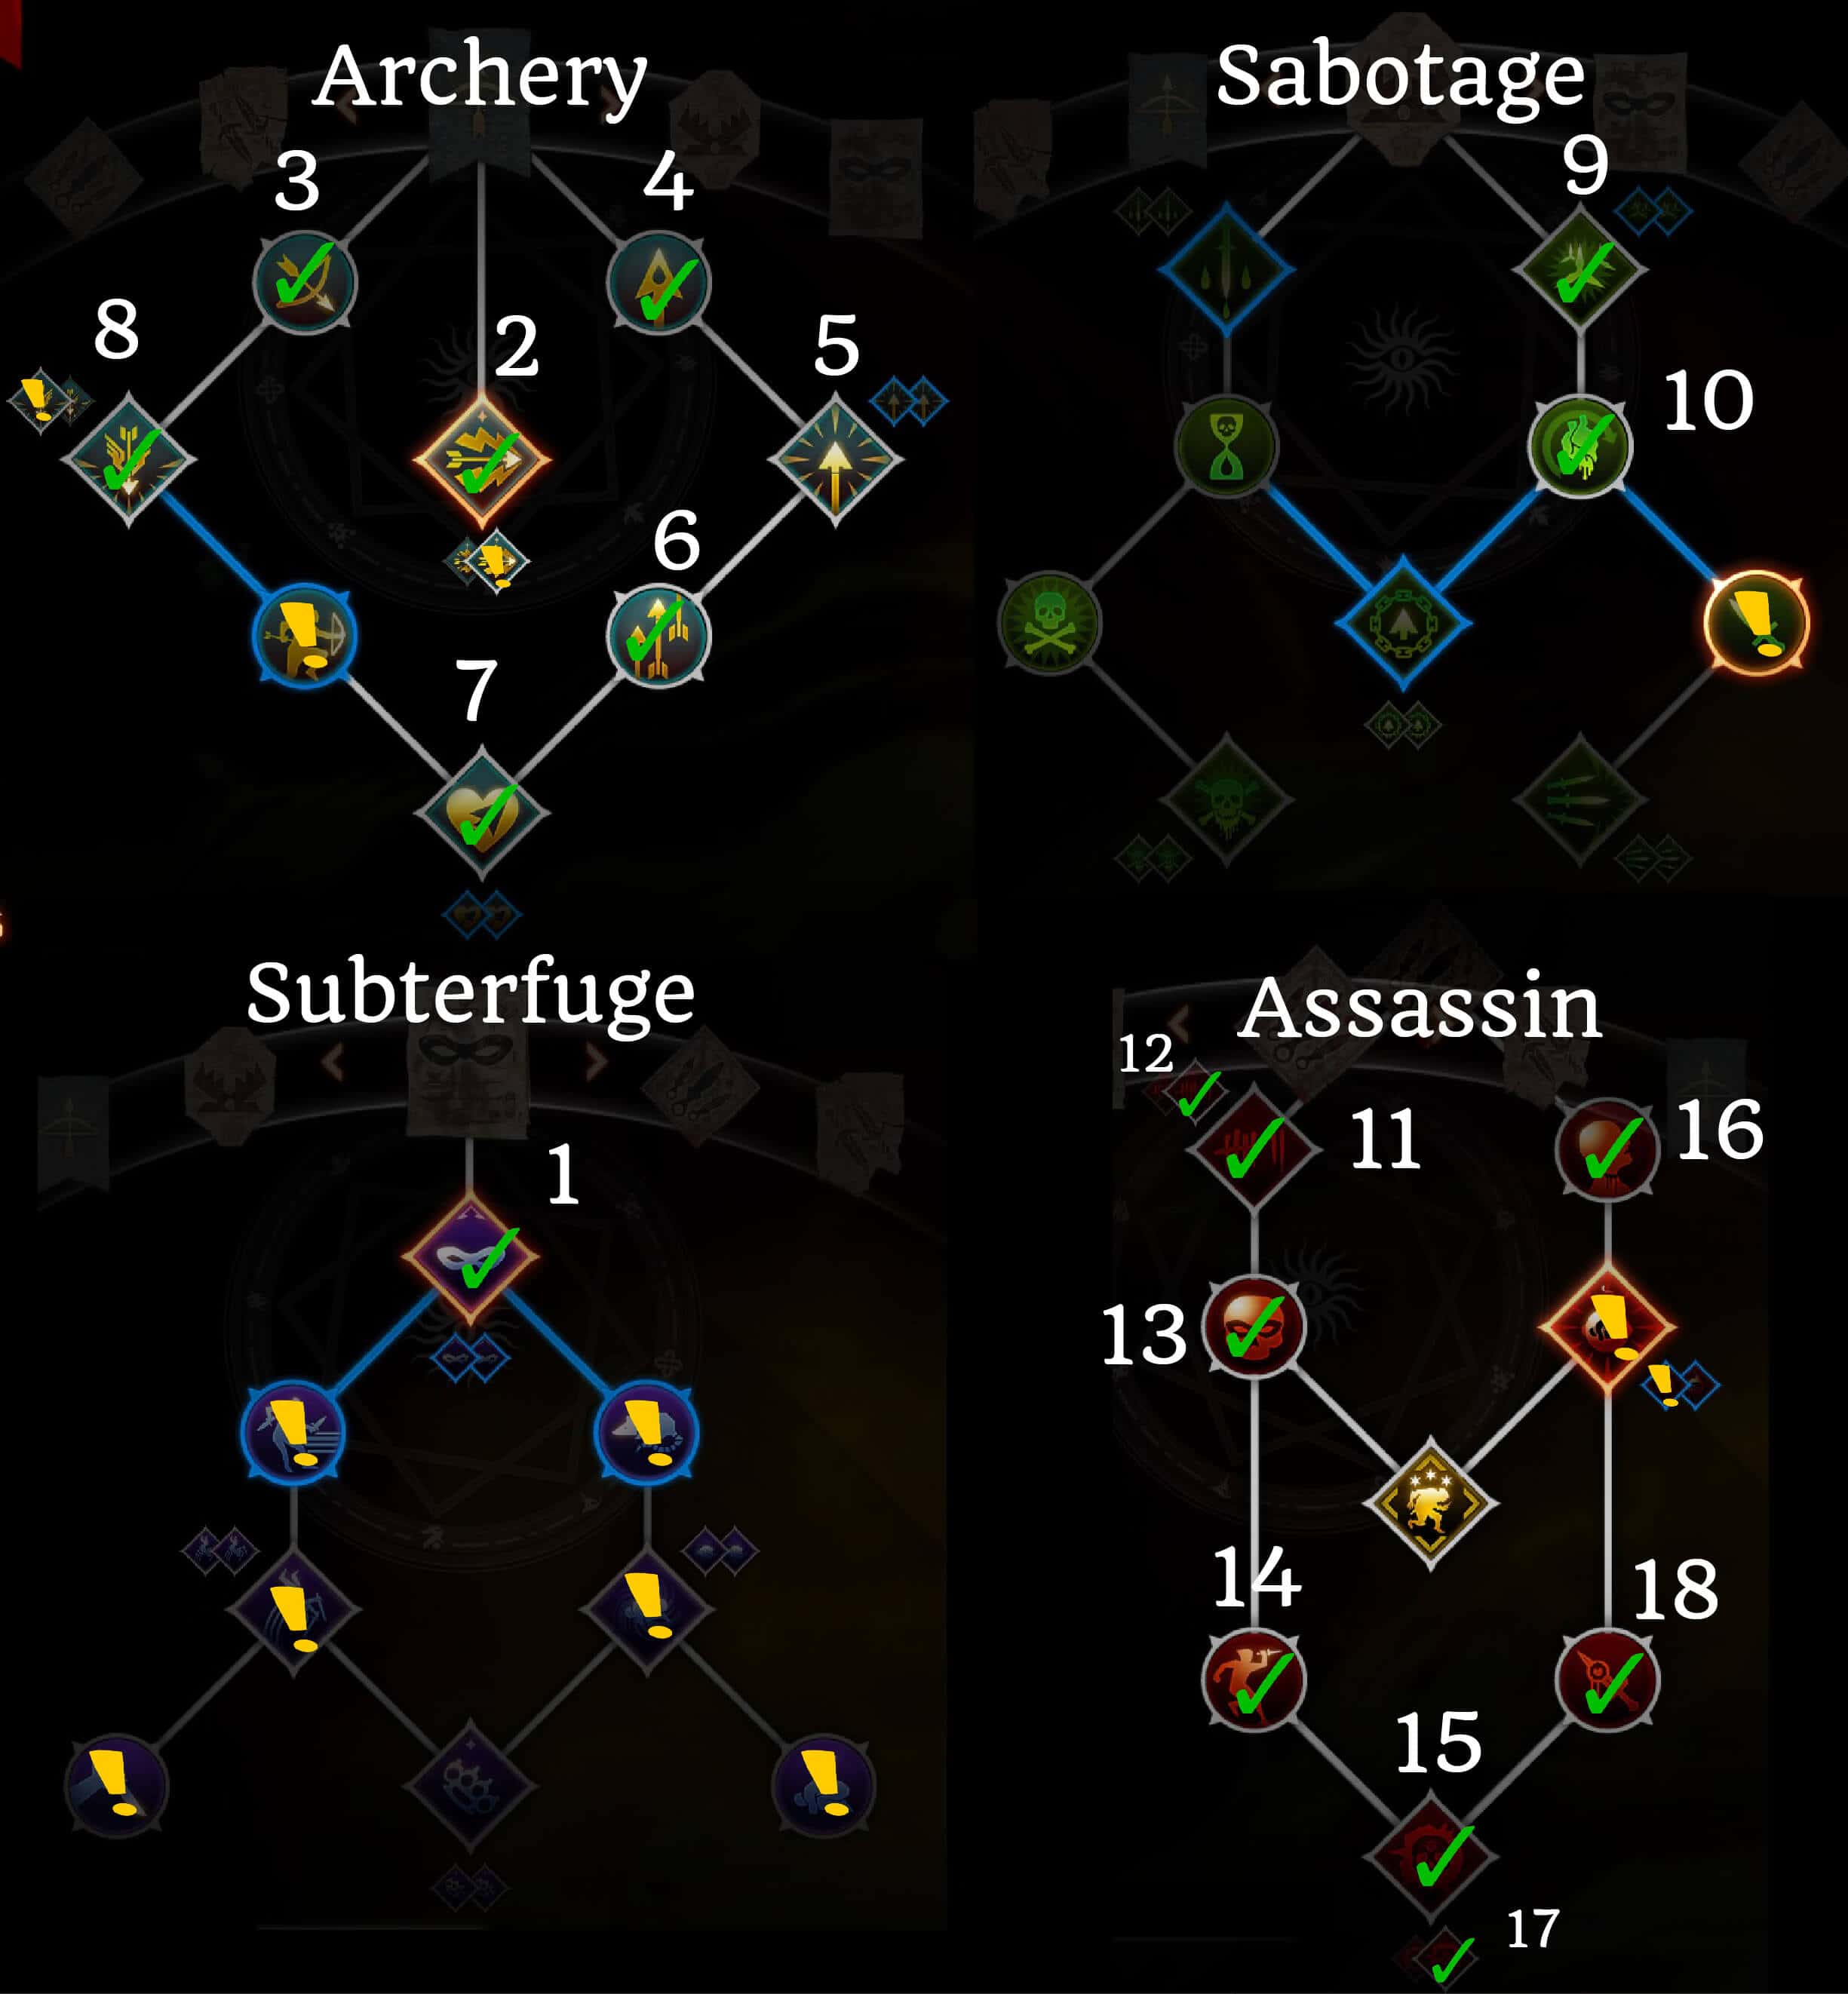 Best Rogue builds. Complete guide - weapons, skills, tactics